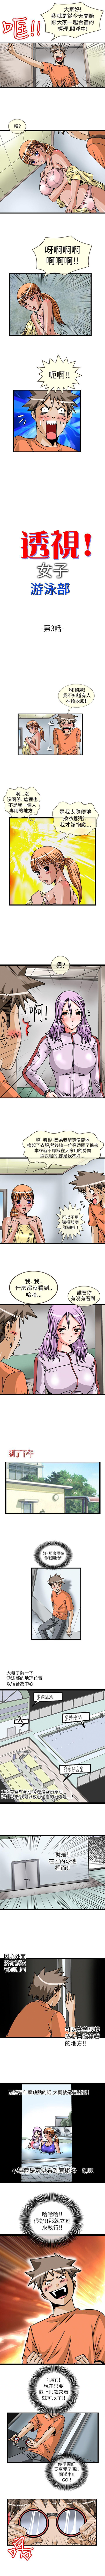 Cams 透視！女子游泳部 1-13 Groping - Page 5